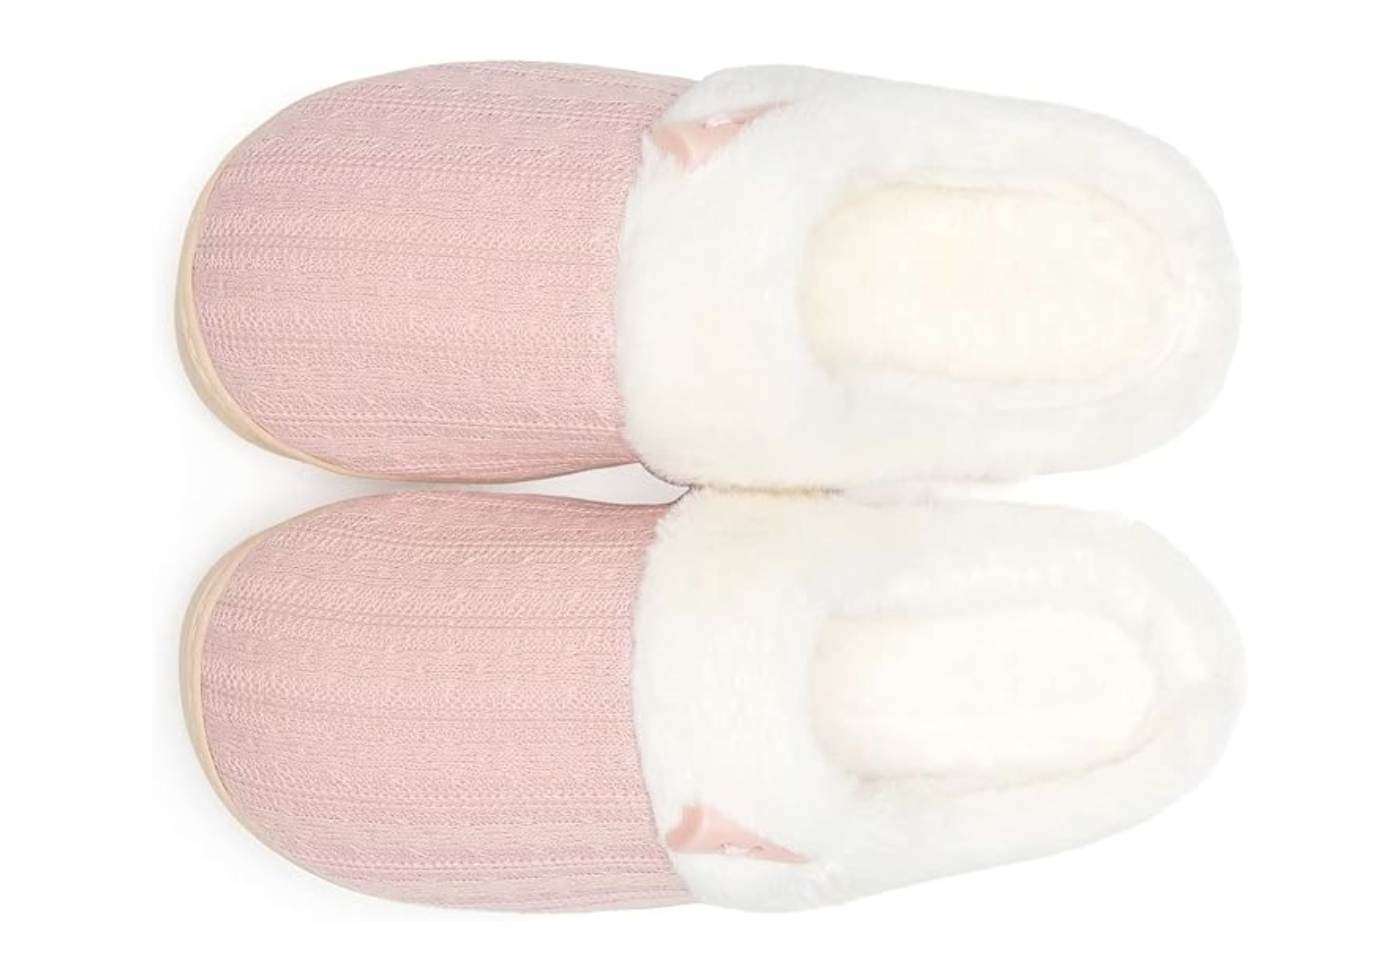 Get Set Globe Top 10 Best Comfy Slippers Like Shoes - NineCiFun Women's Slip on Fuzzy House Slippers Memory Foam Slippers